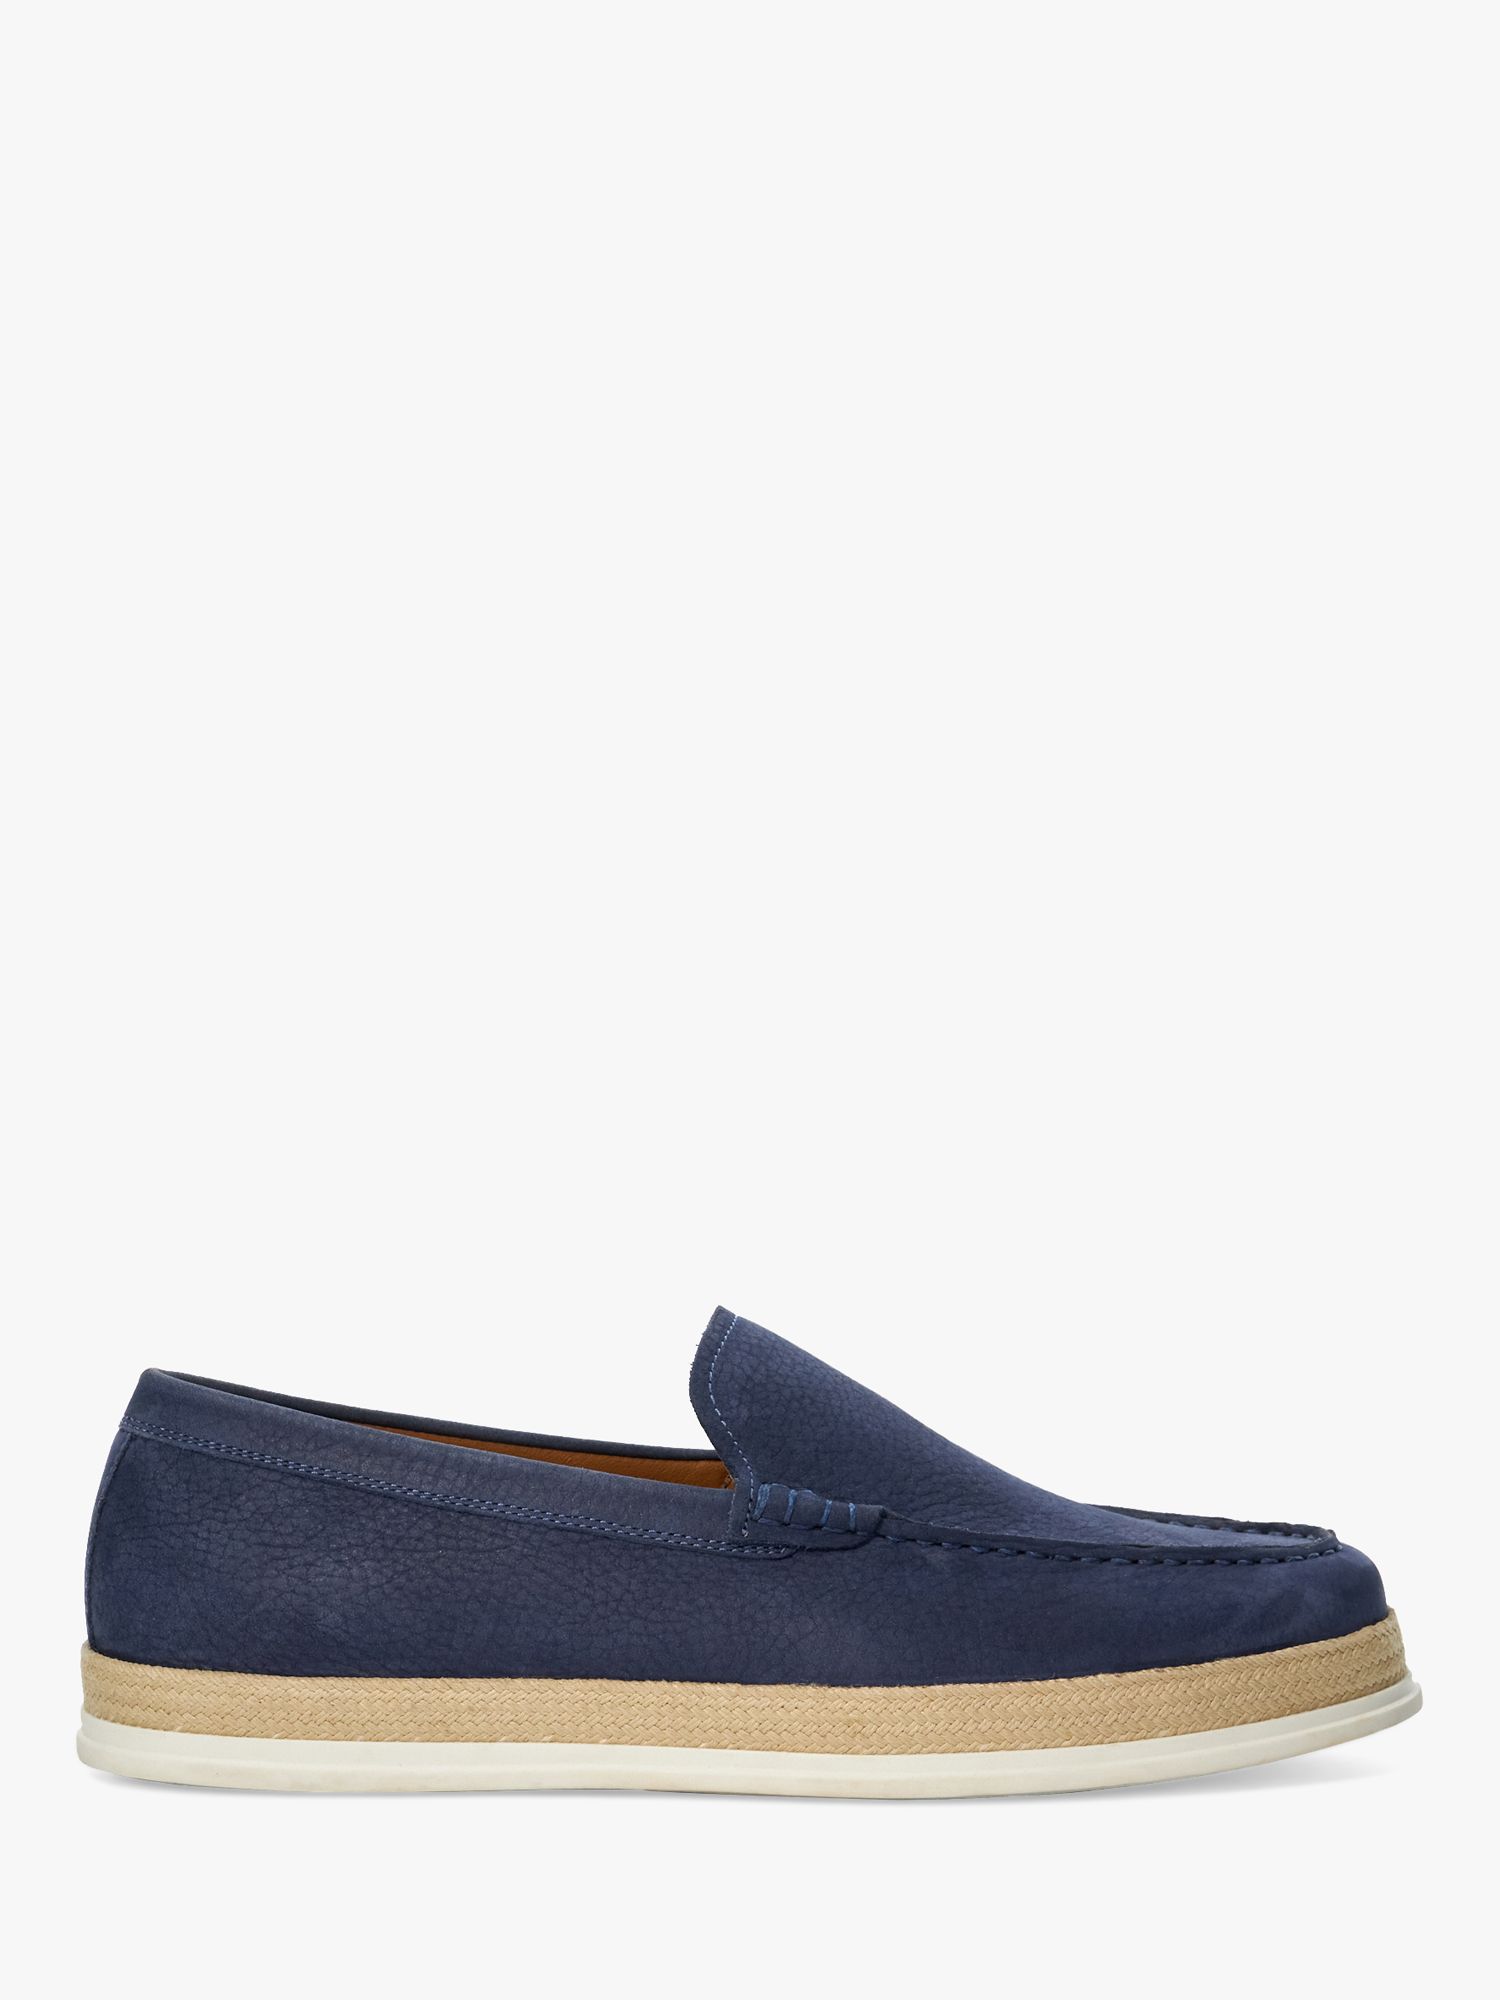 Dune Bountii Leather Espadrille Detail Shoes, Navy, 10